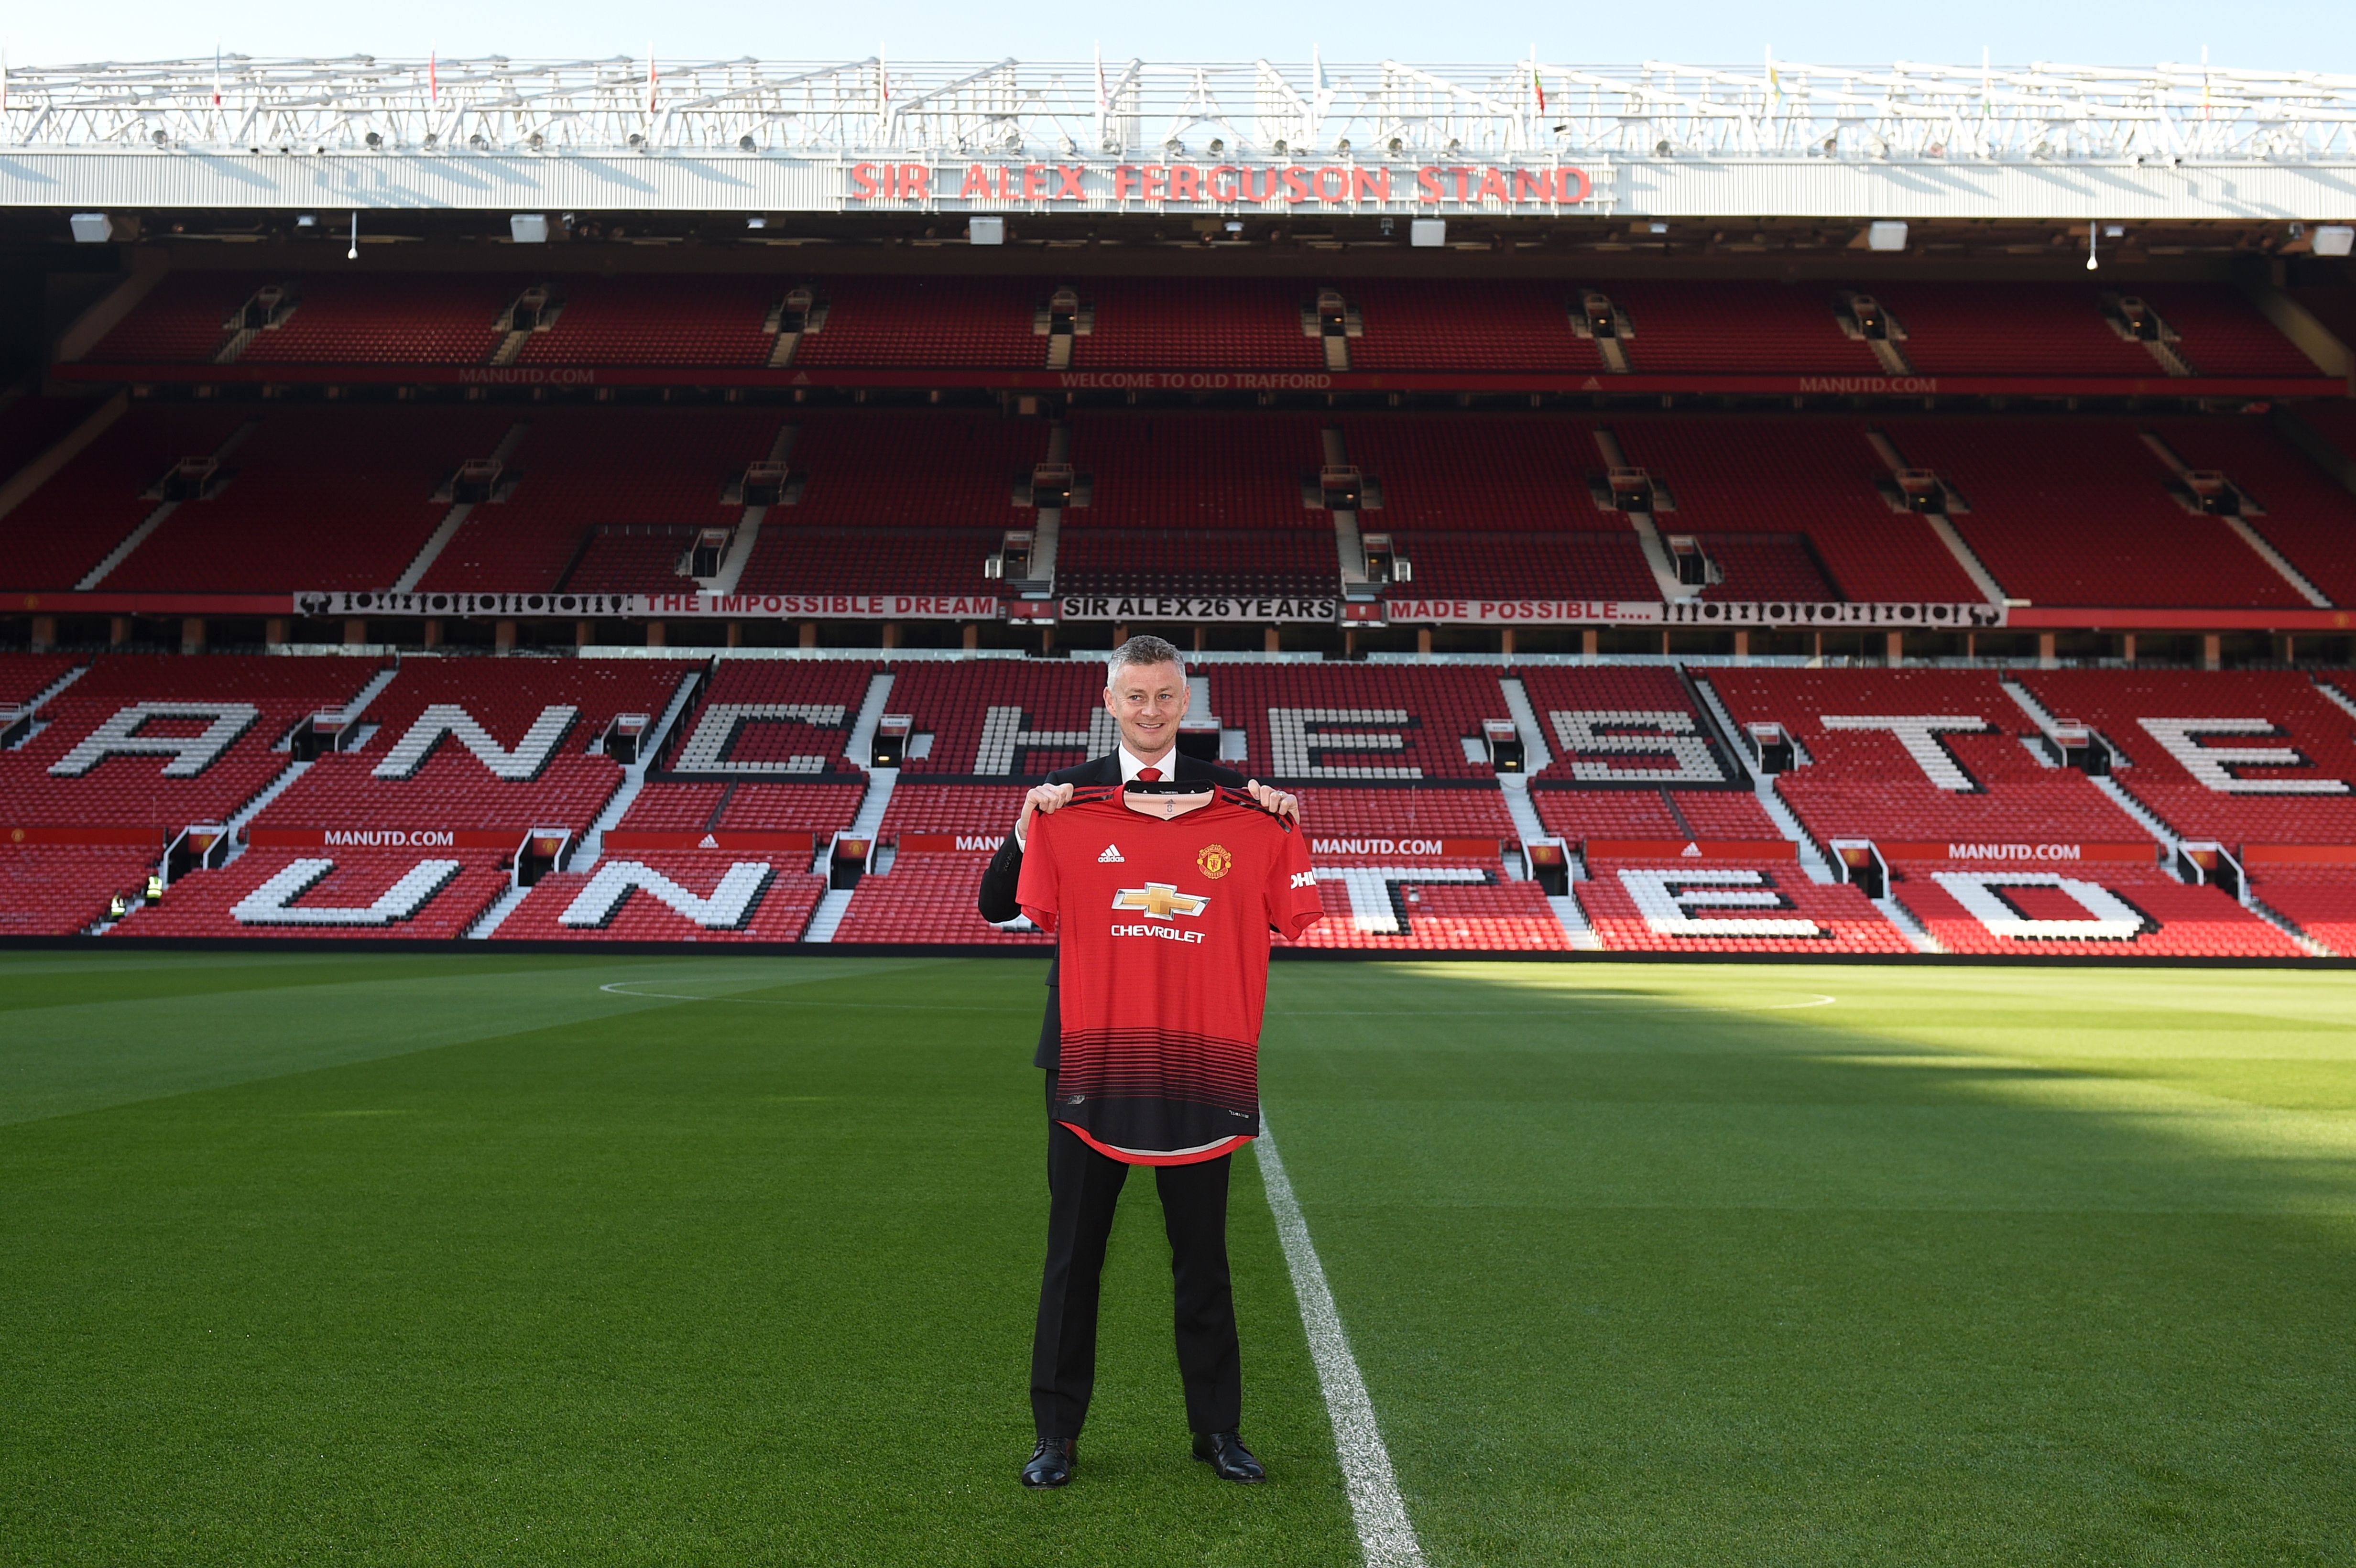 Manchester United's Norwegian manager Ole Gunnar Solskjaer poses with a team jersey during a photo call at Old Trafford in Manchester, northwest England, on March 28, 2019 after it was announced that he was appointed as the clubs full-time manager on a three-year contract. - Ole Gunnar Solskjaer said he was "beyond excited" to be handed the Manchester United manager's job on a full-time basis as the club announced on Thursday he had signed a three-year deal. (Photo by Oli SCARFF / AFP) / RESTRICTED TO EDITORIAL USE. No use with unauthorized audio, video, data, fixture lists, club/league logos or 'live' services. Online in-match use limited to 75 images, no video emulation. No use in betting, games or single club/league/player publications. /         (Photo credit should read OLI SCARFF/AFP/Getty Images)